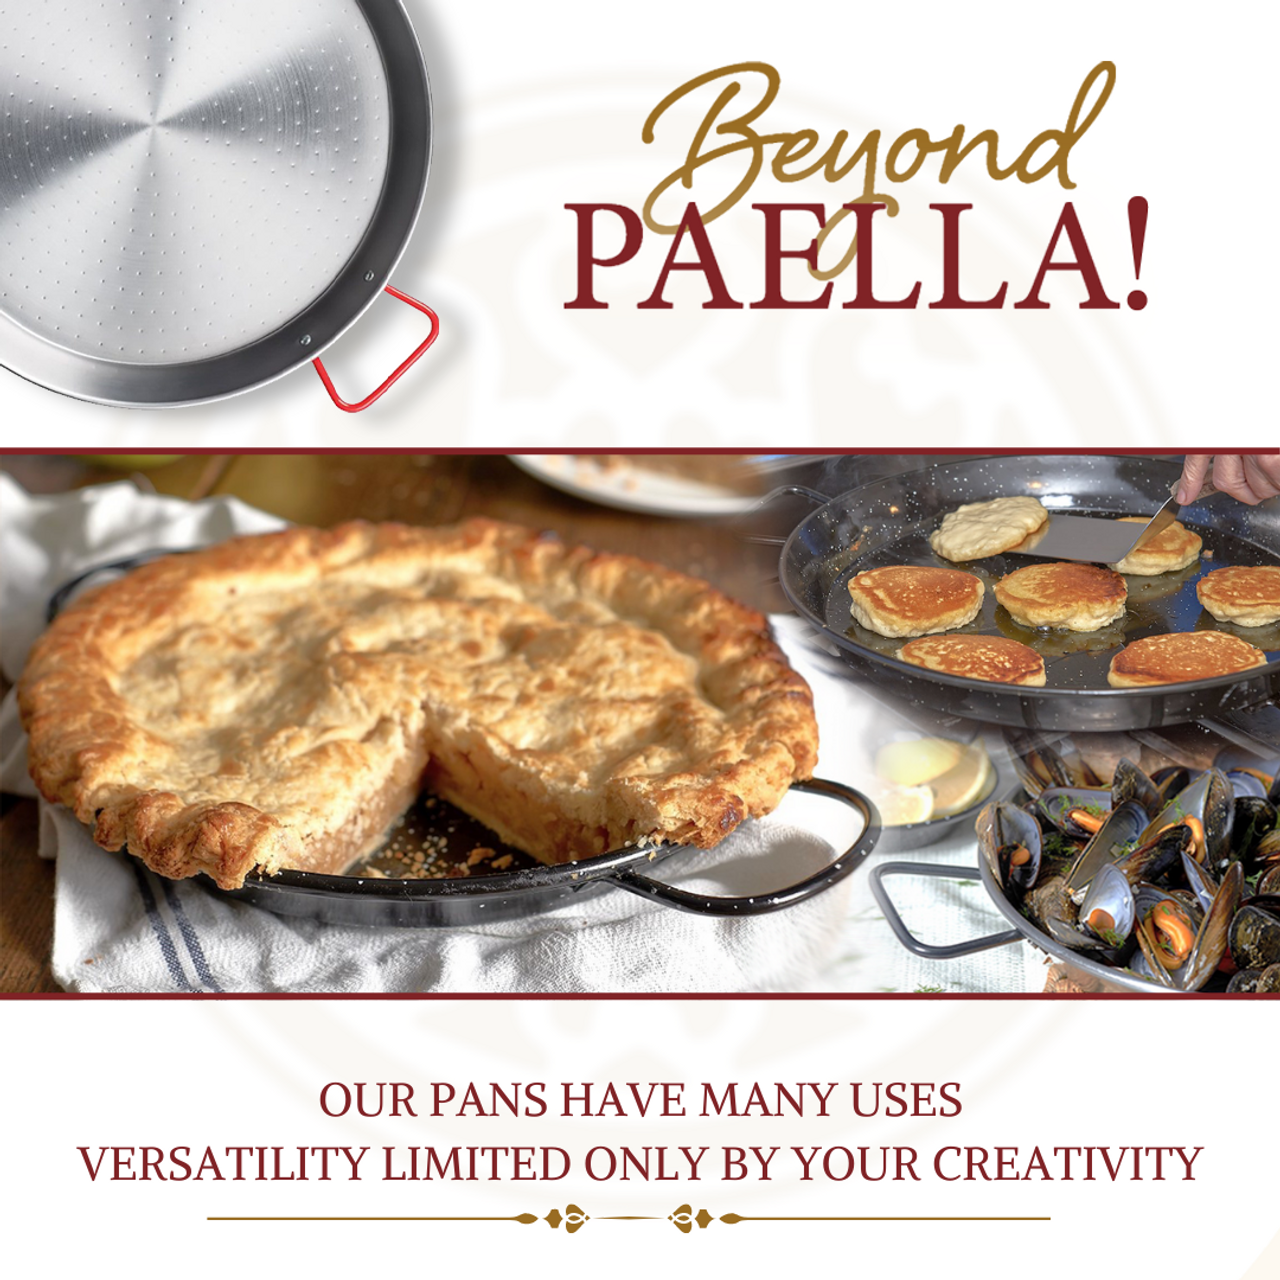 https://cdn11.bigcommerce.com/s-m3qoi99x9/images/stencil/1280x1280/products/197/1072/Other_uses_for_paella_pans__96866.1686940753.png?c=1